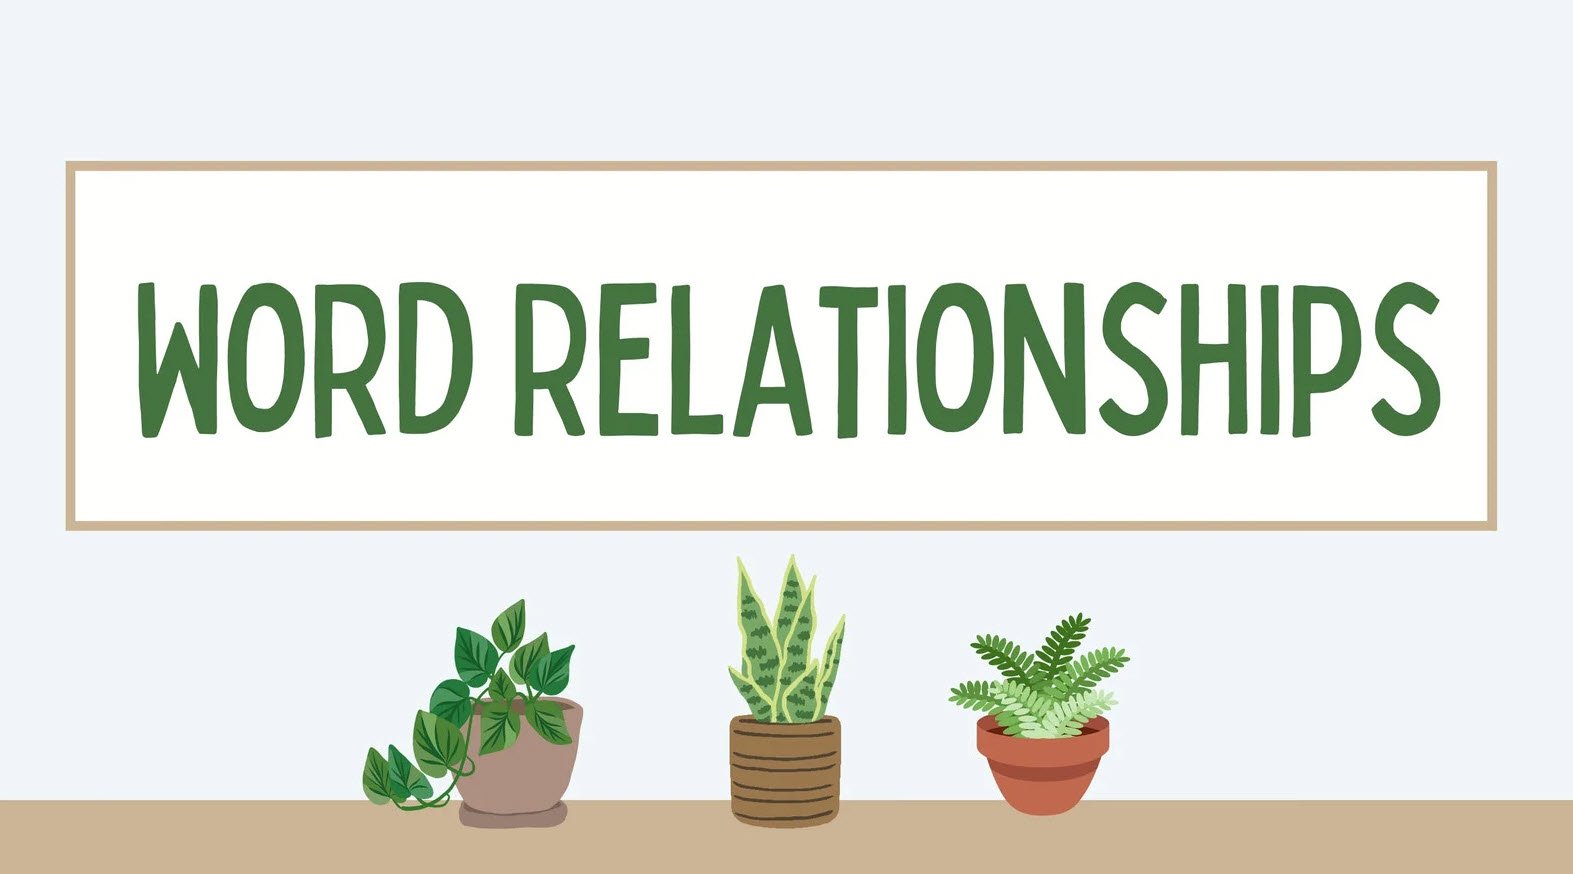 Word Relationships